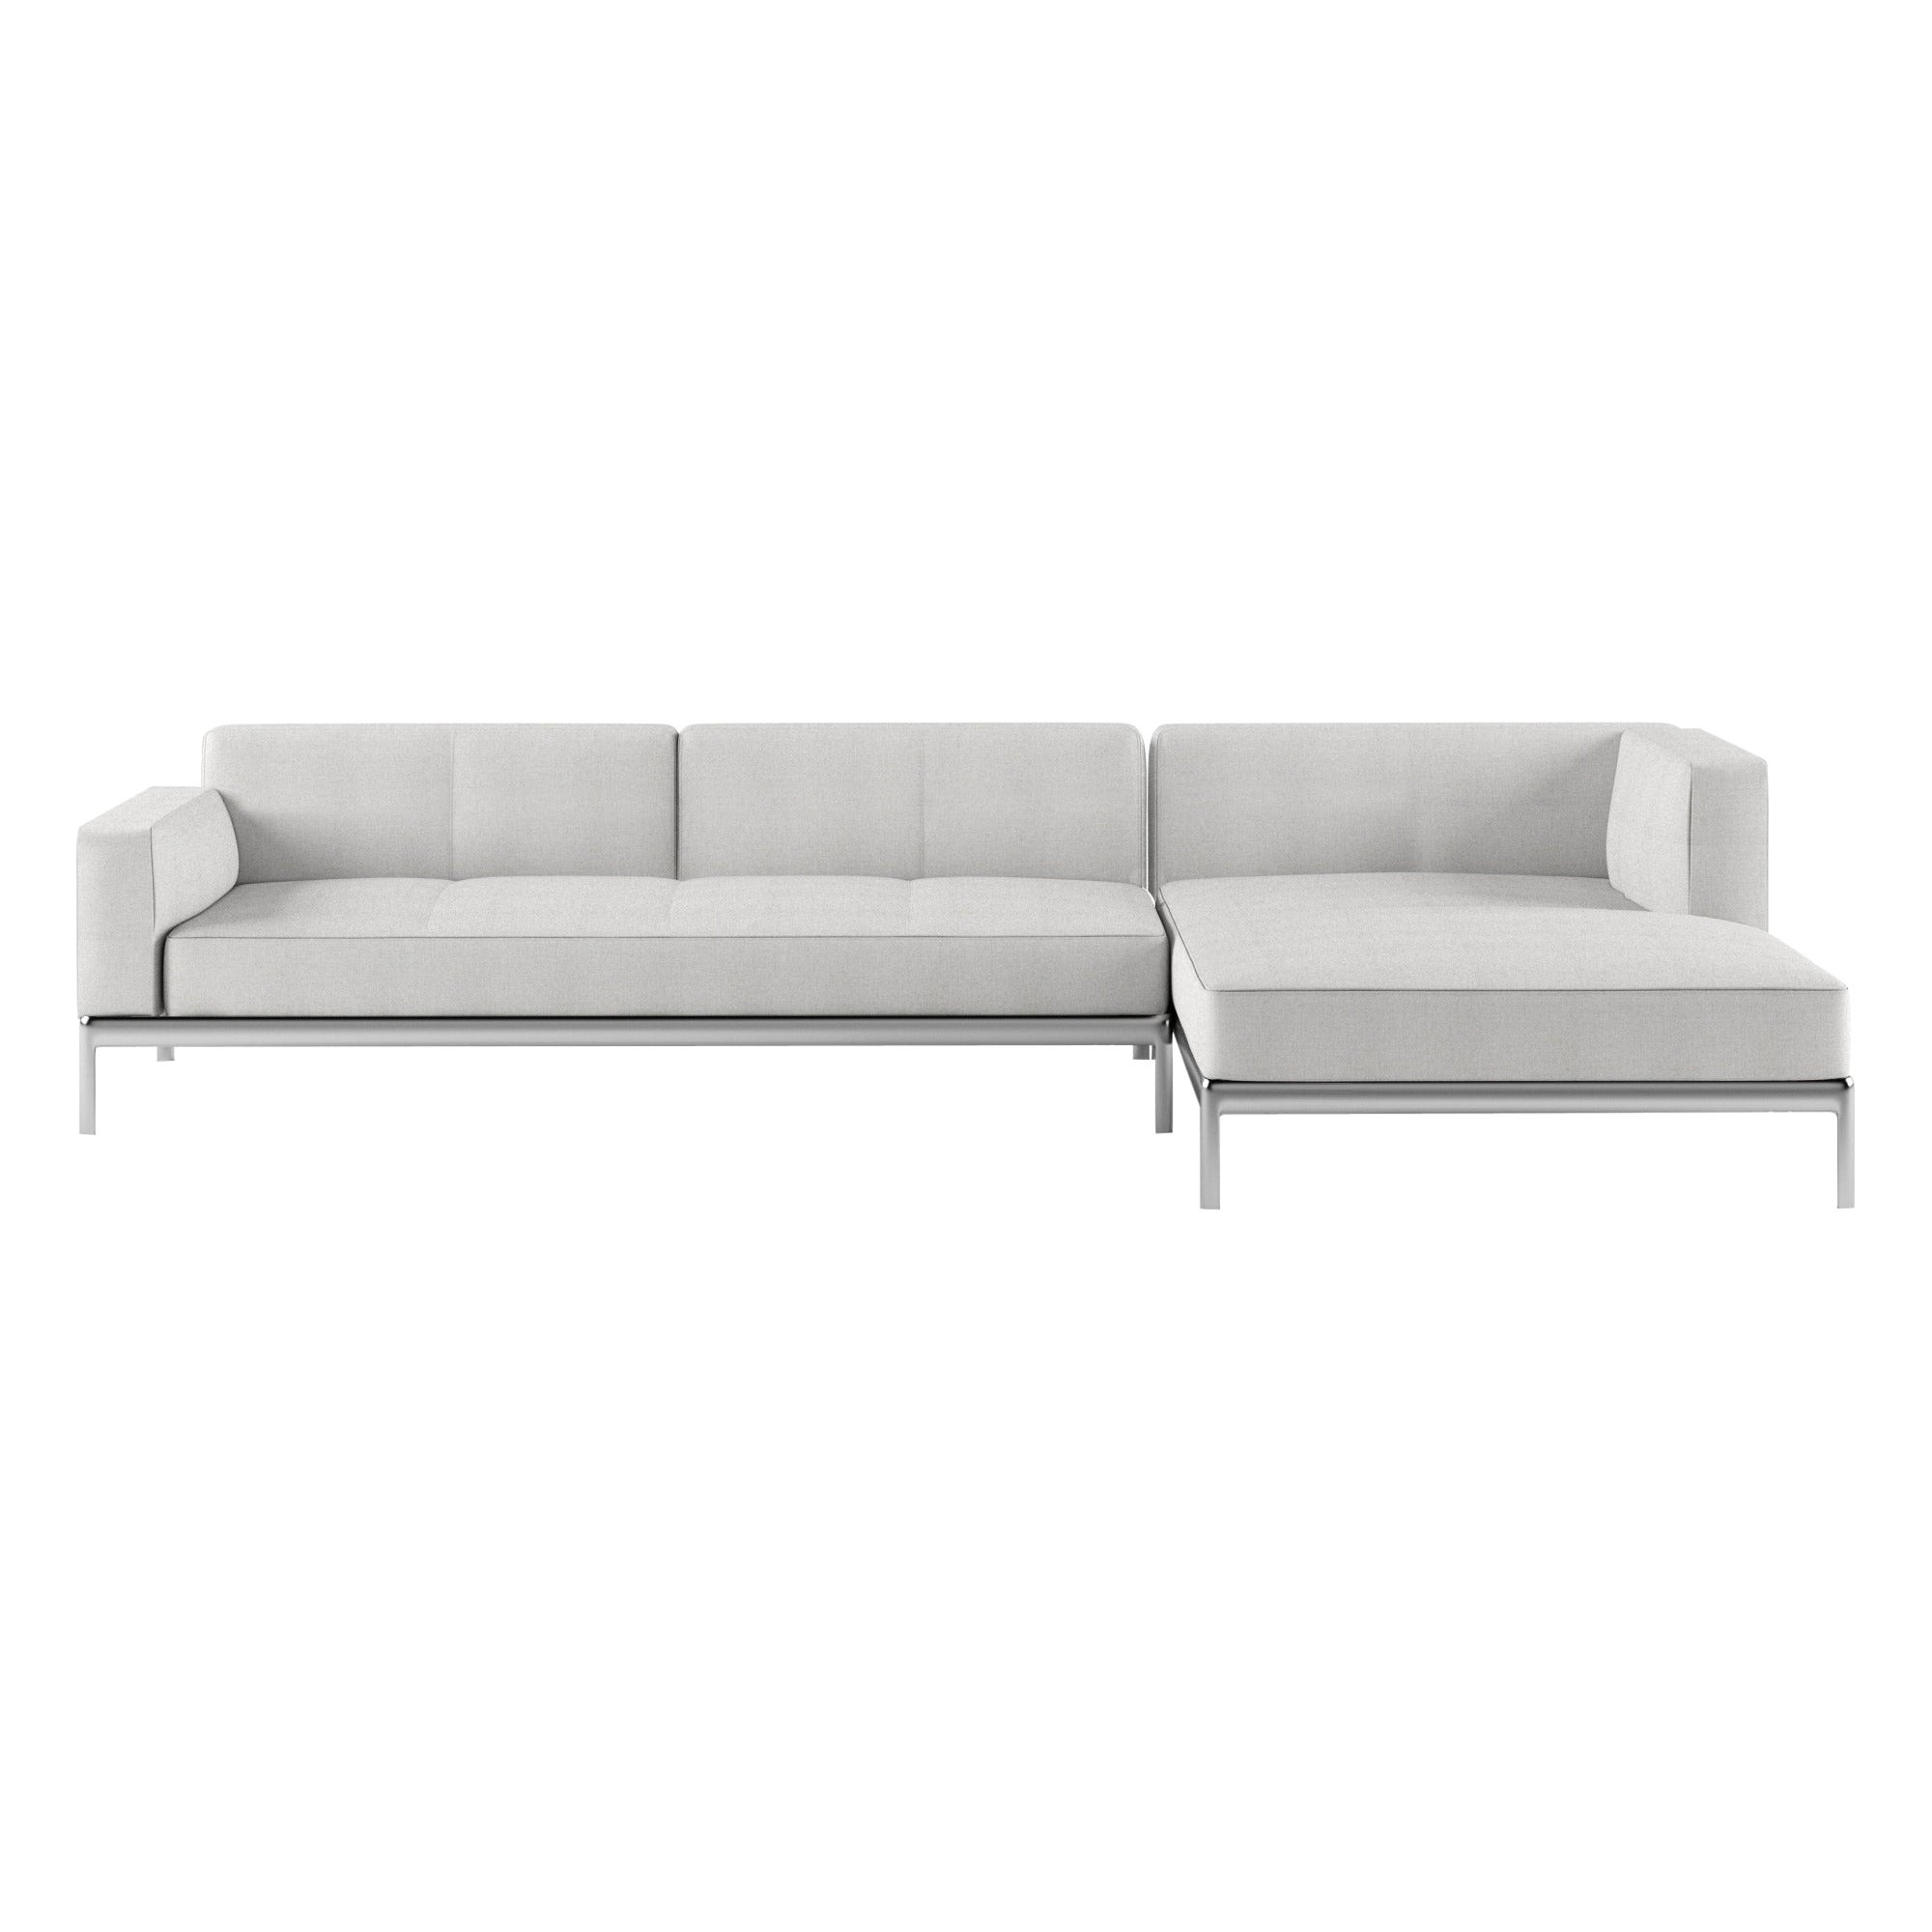 Alias P06+P05 AluZen Sectional Sofa in Upholstery with Polished Aluminium Frame For Sale